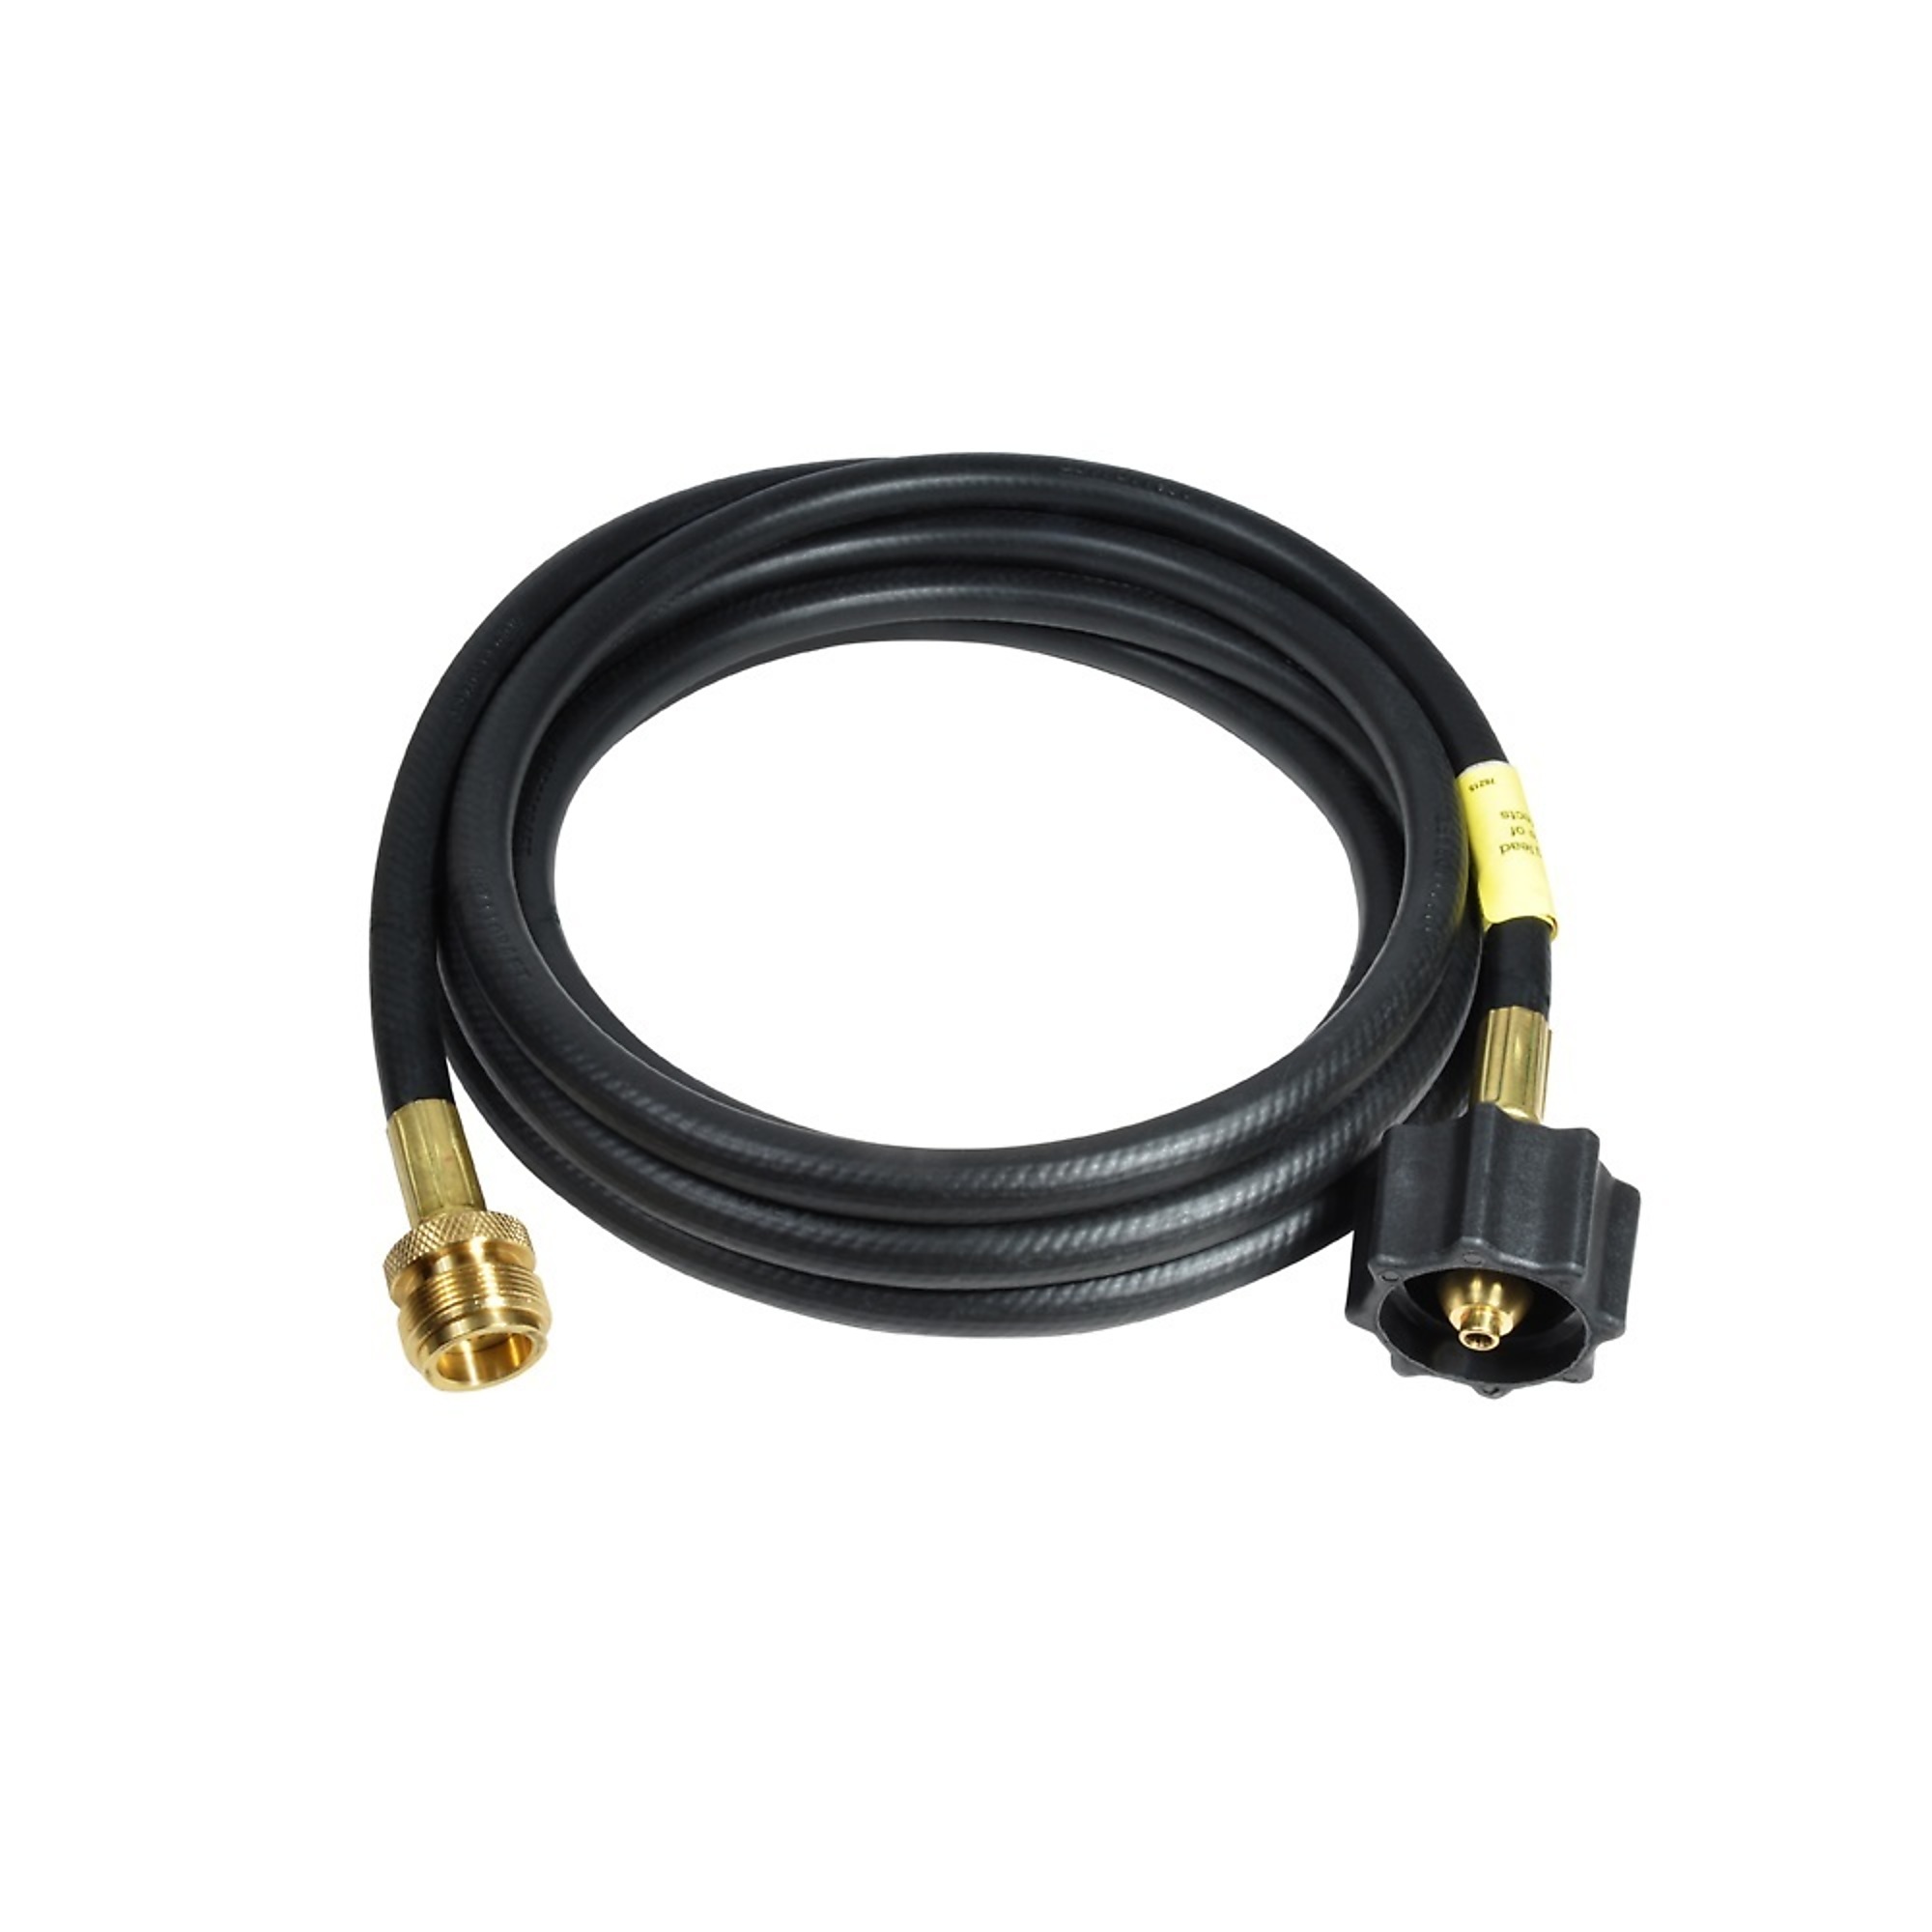 Mr. Heater, Propane Hose Assembly, Included (qty.) 1 Material Rubber, Compatible With 20 lb propane tanks, Model F273703-60